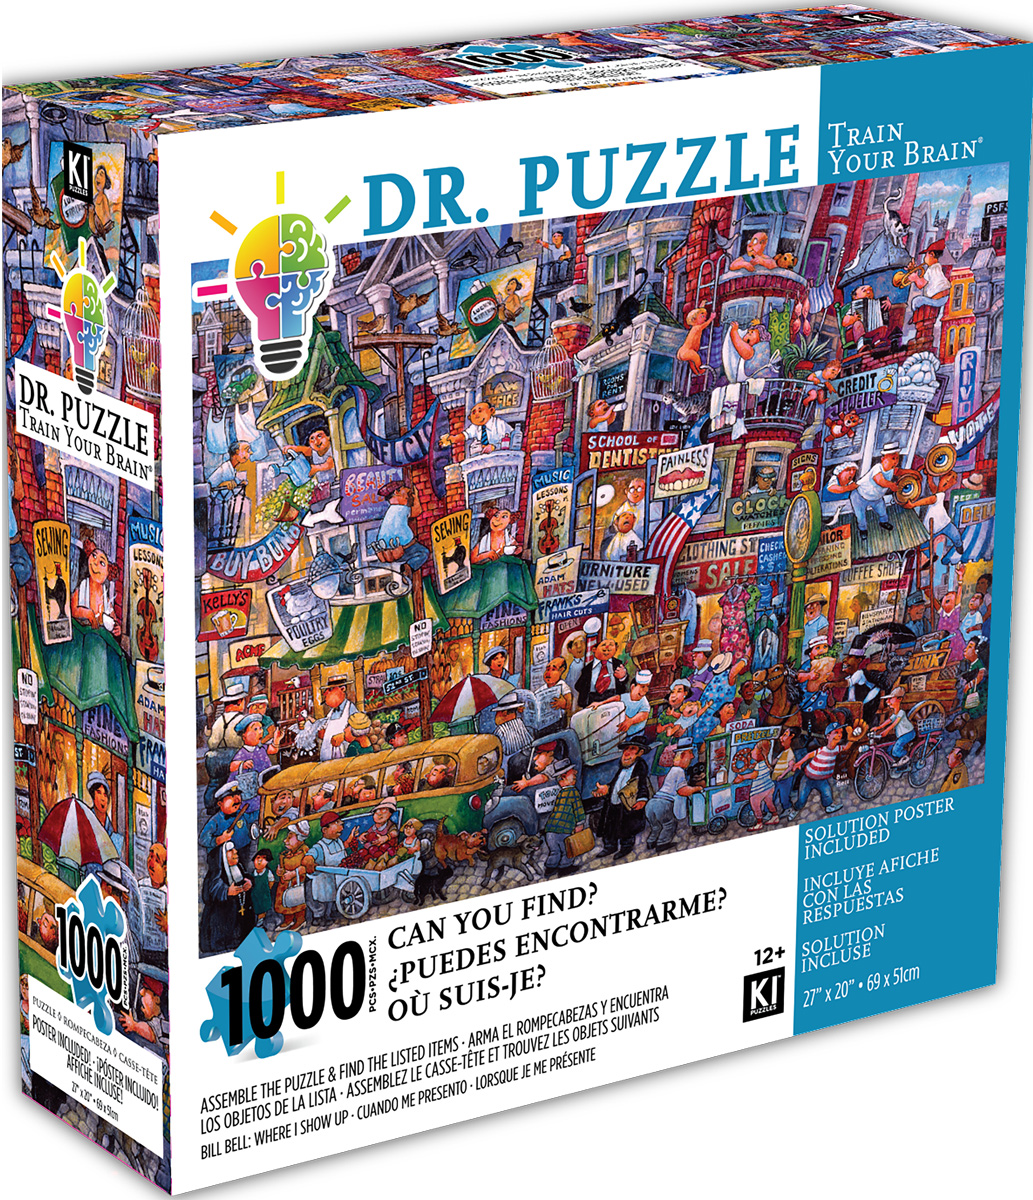 Dr. Puzzle "Where I Show Up"